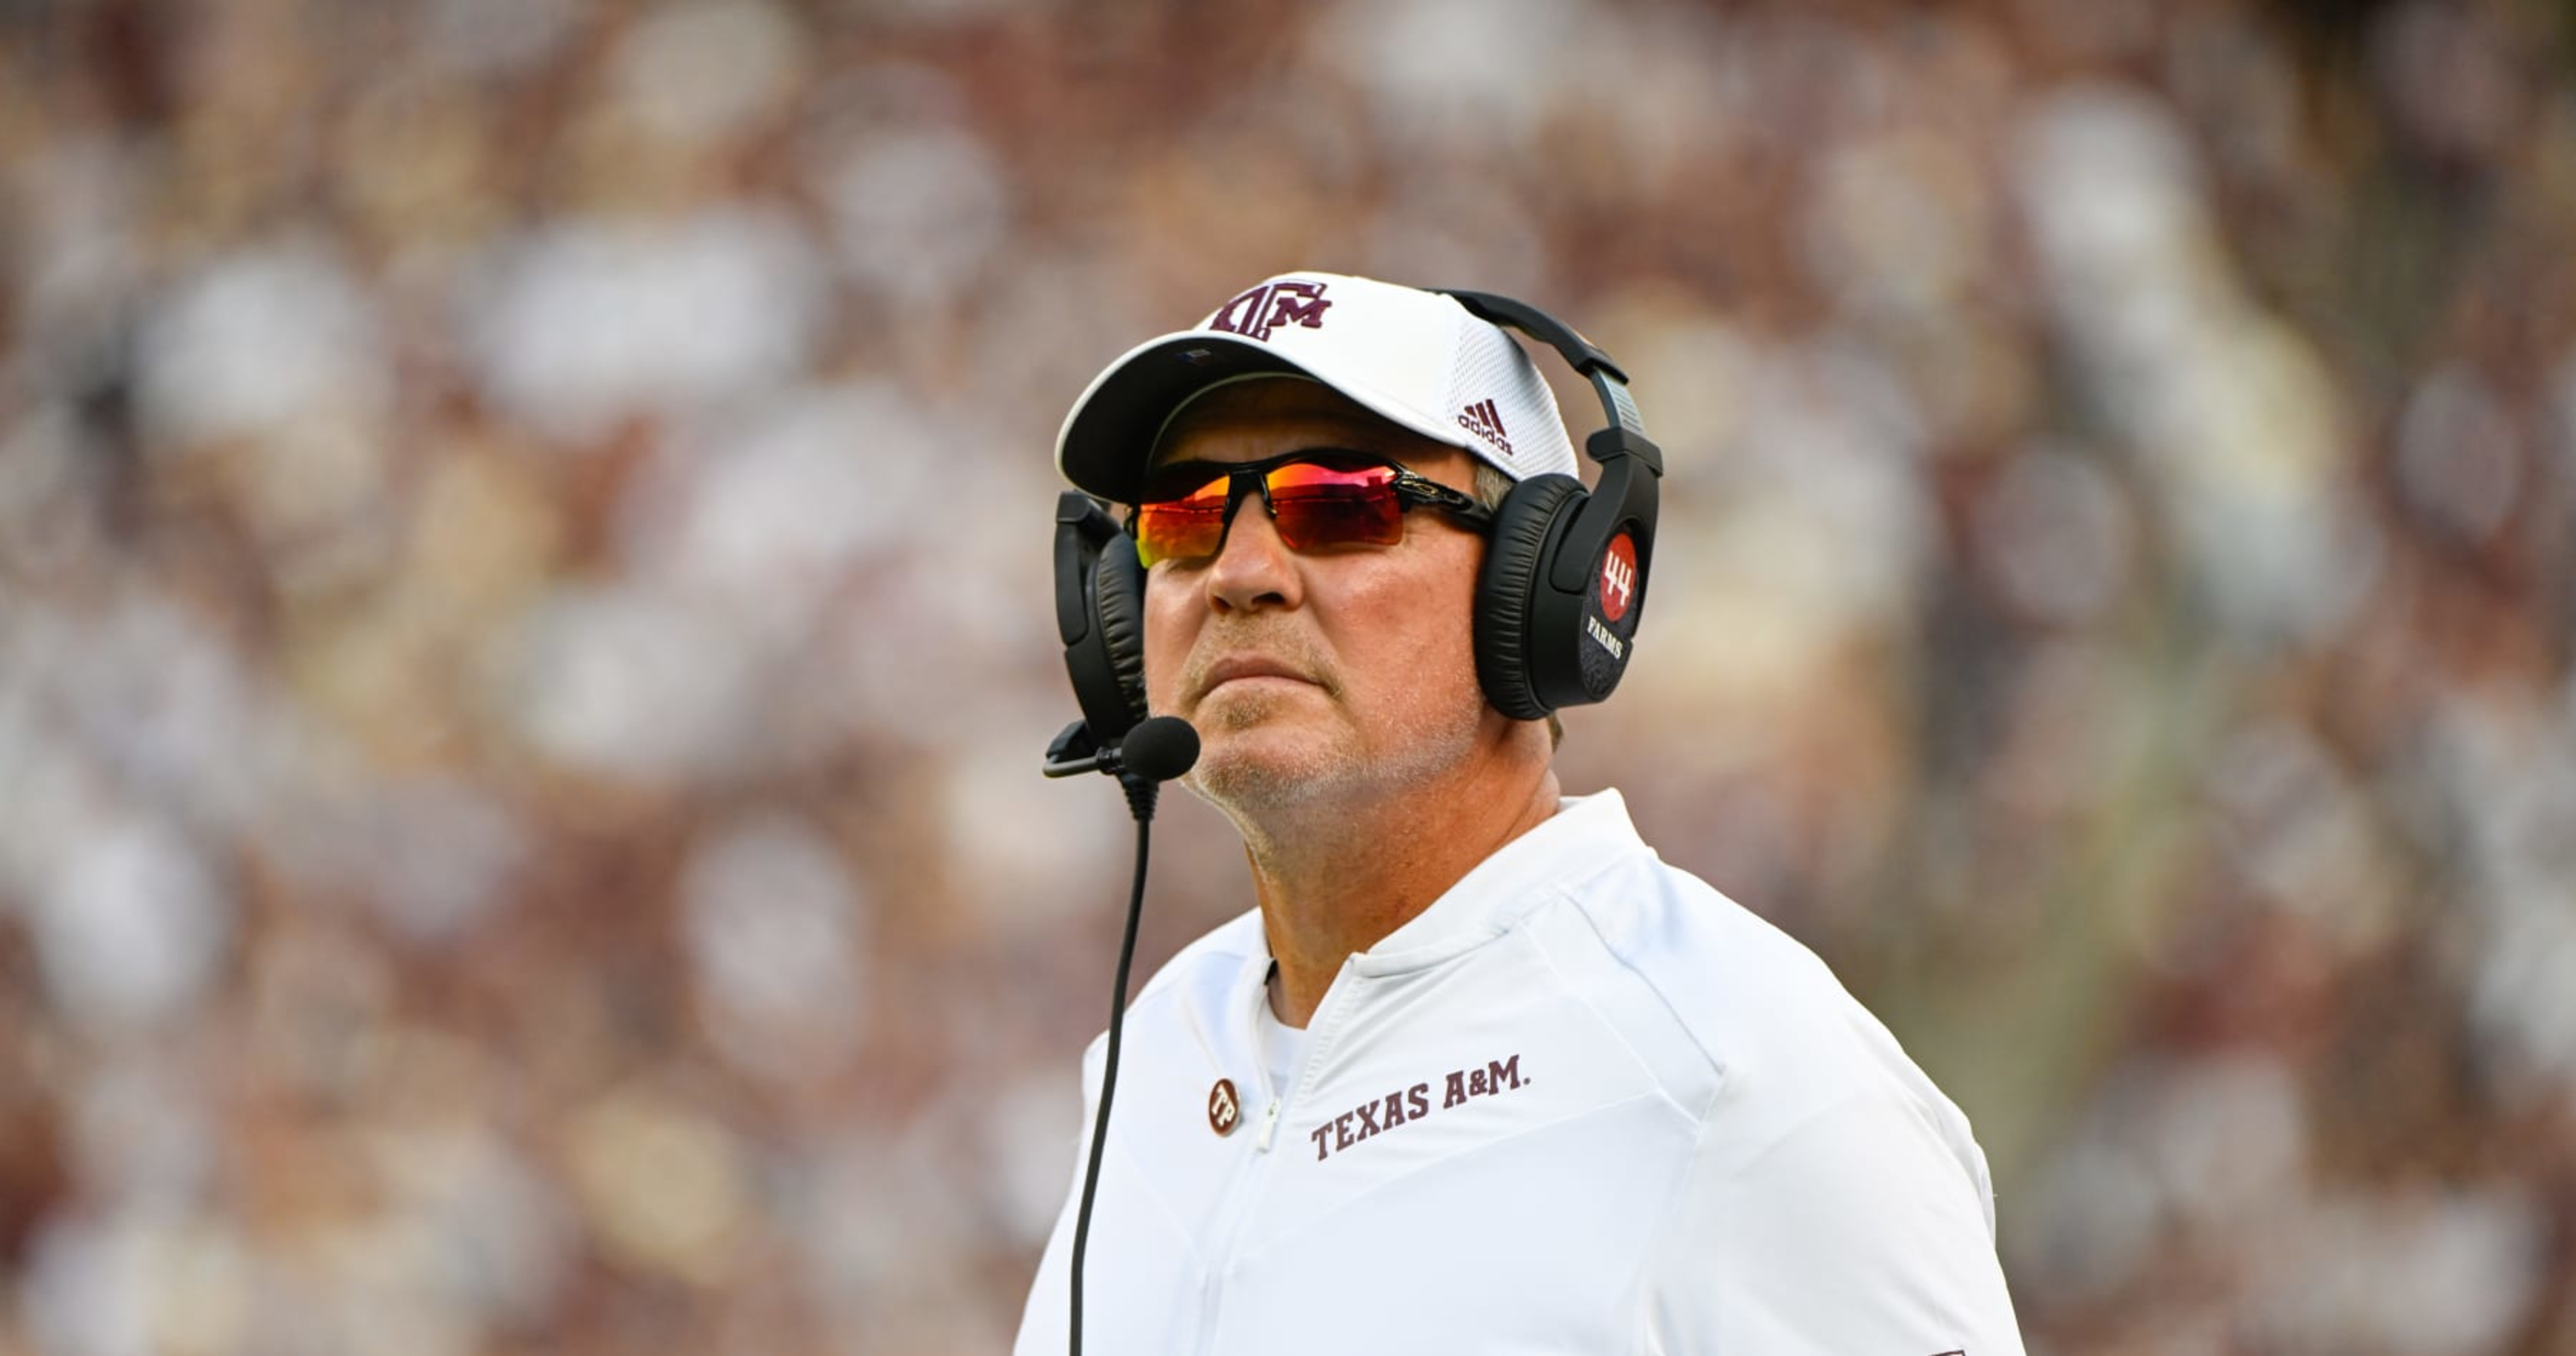 Report: Texas A&M's Jimbo Fisher on Hot Seat; Owed $76.8M Buyout If Fired in 2023